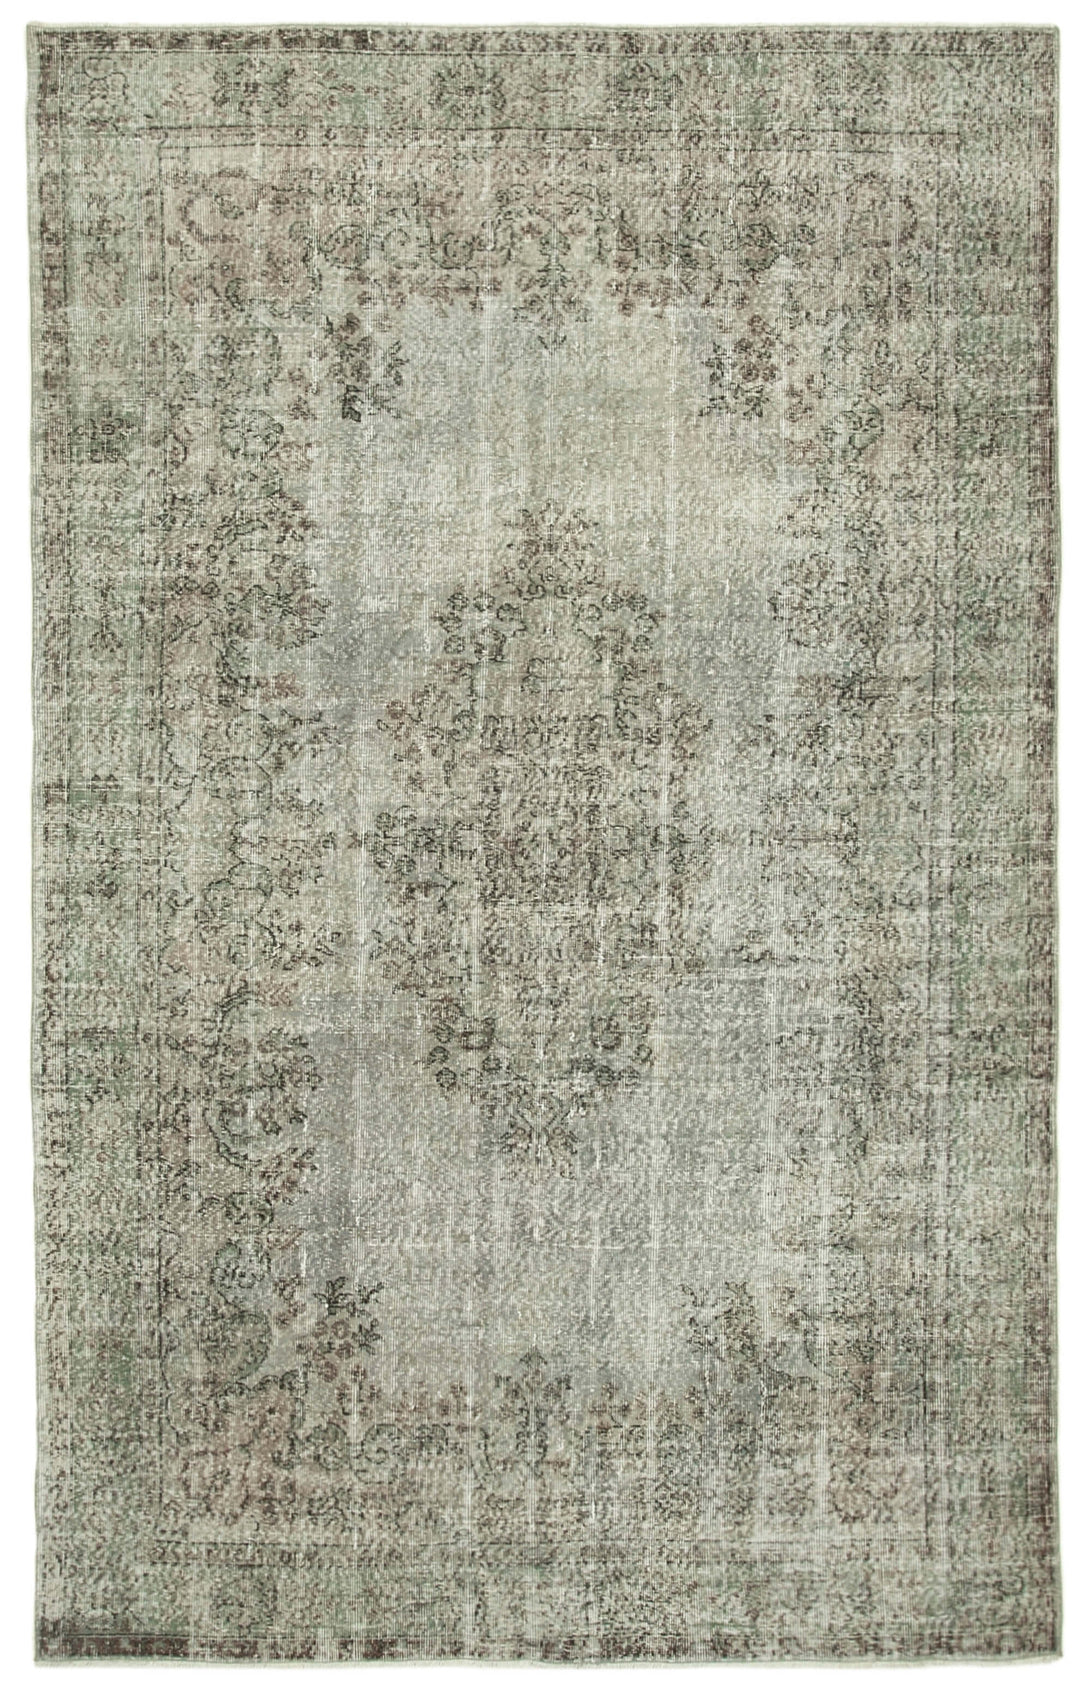 Handmade Overdyed Area Rug > Design# OL-AC-39405 > Size: 6'-6" x 10'-1", Carpet Culture Rugs, Handmade Rugs, NYC Rugs, New Rugs, Shop Rugs, Rug Store, Outlet Rugs, SoHo Rugs, Rugs in USA